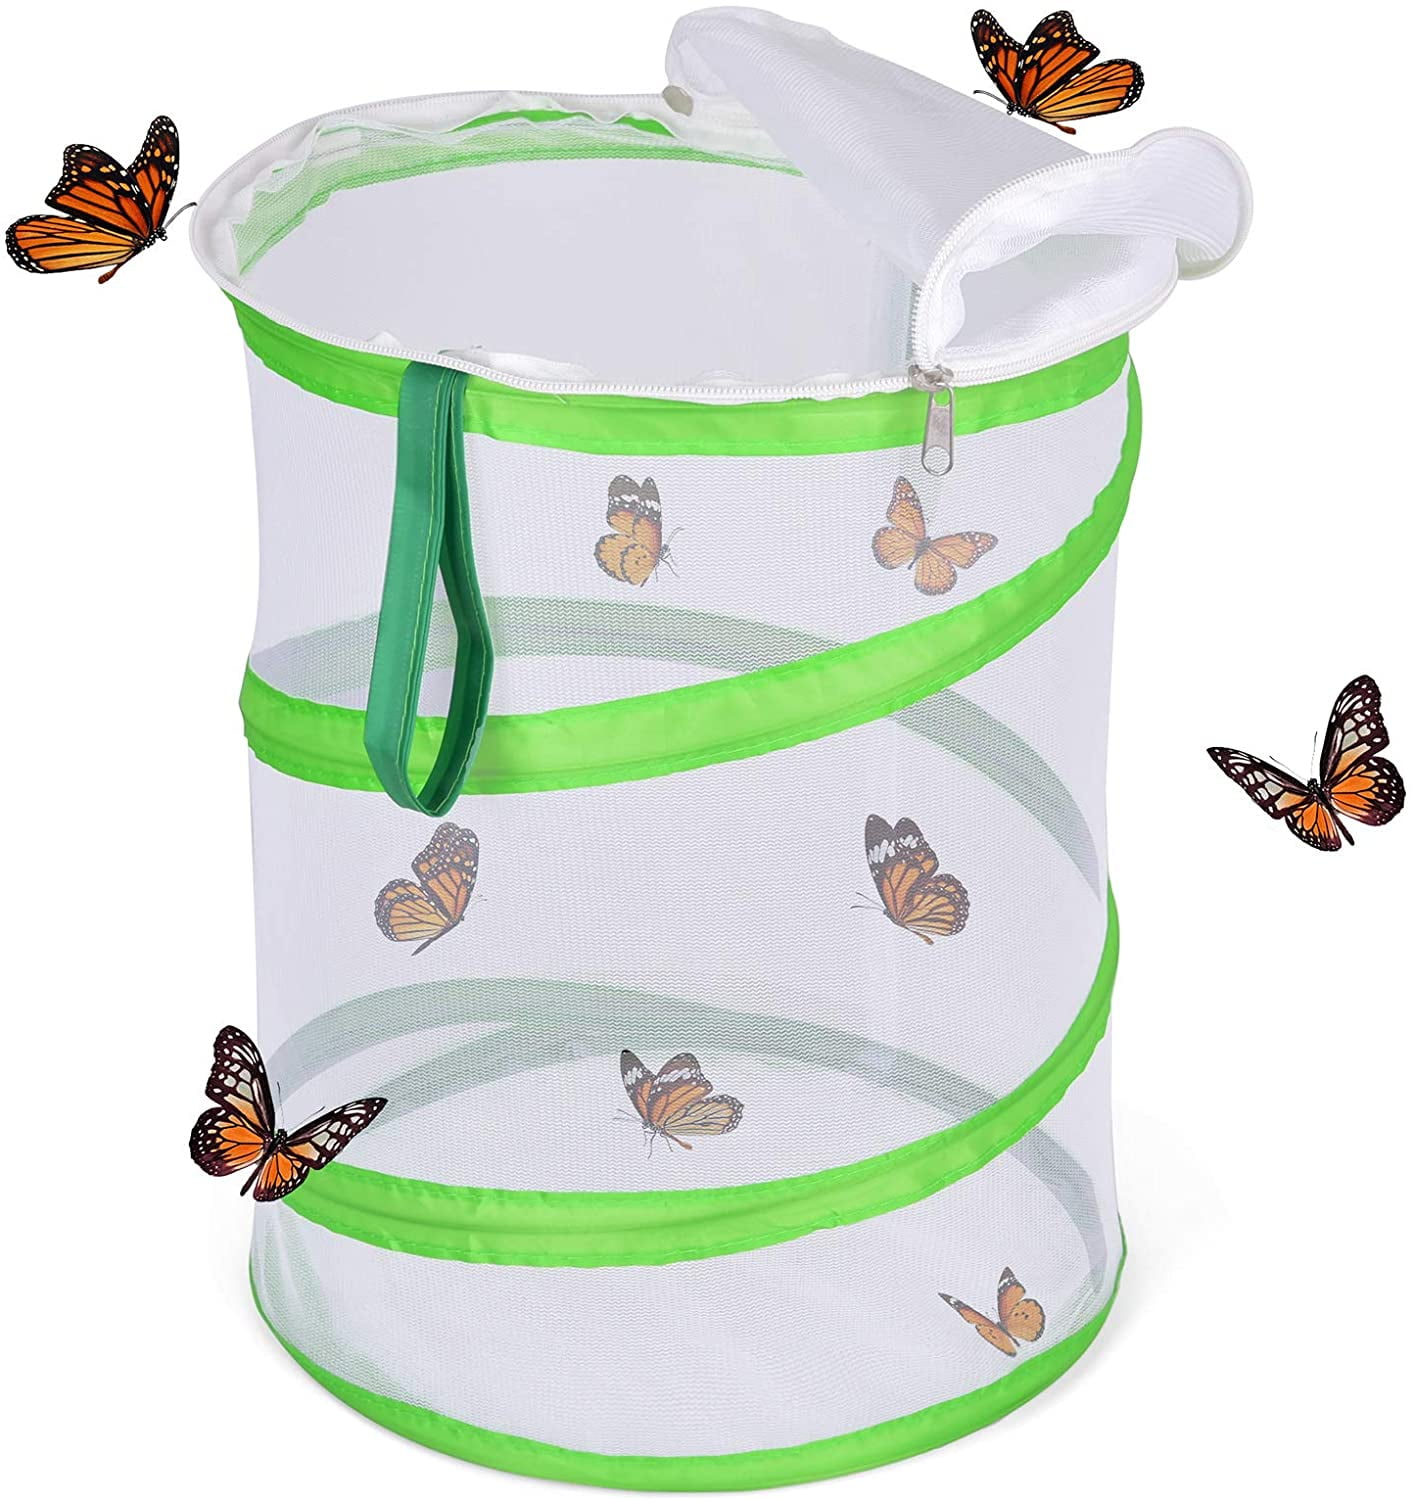 Extendable up to 34 for Kids 4 Packs Telescopic Butterfly Net with Free Butterfly Catcher and Butterfly Tweezers Perfect for Catching Bugs Insect Small Fish 